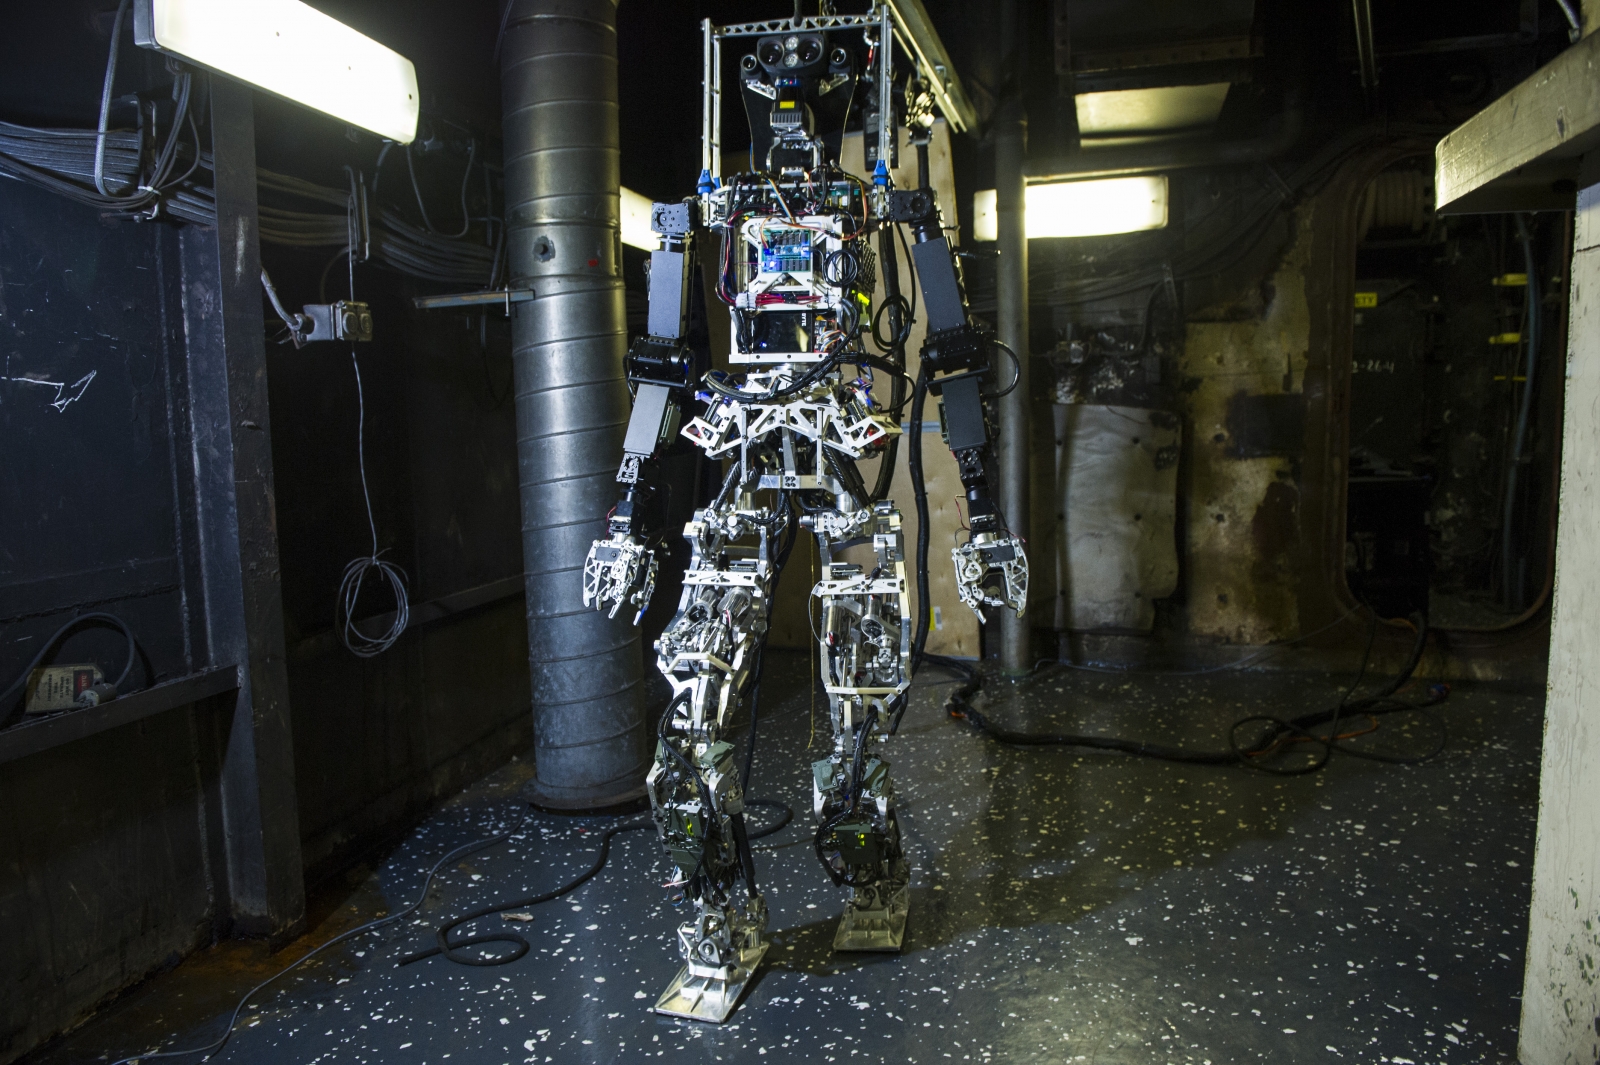 Meet SAFFiR - a new humanoid robot built for the US Navy that can walk, climb, open things and navigate obstacles just like a human